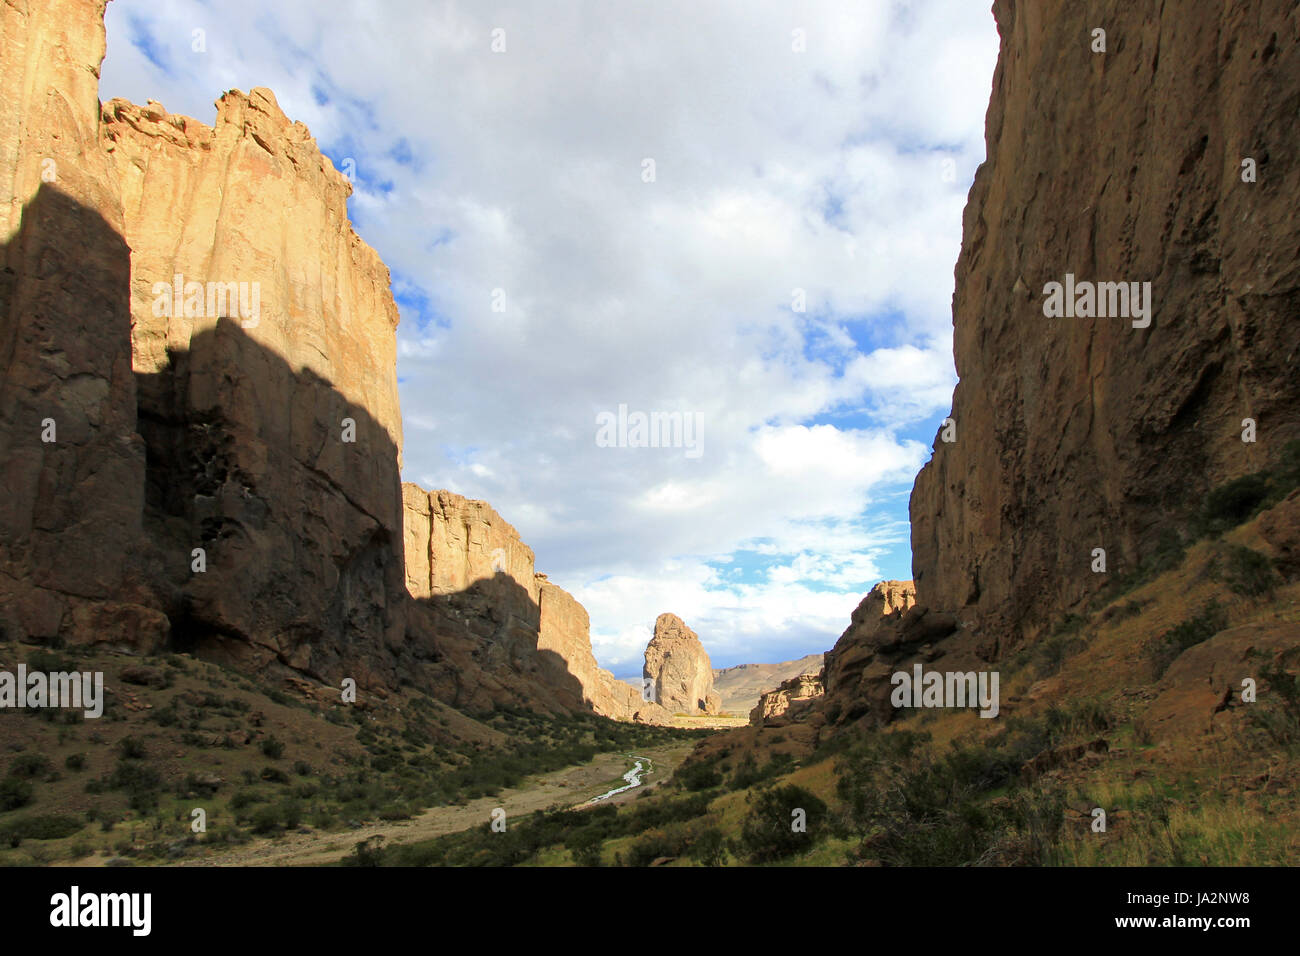 Buitrera Canyon, ein Kletterparadies in Chubut-Tal, Patagonien, Argentinien Stockfoto